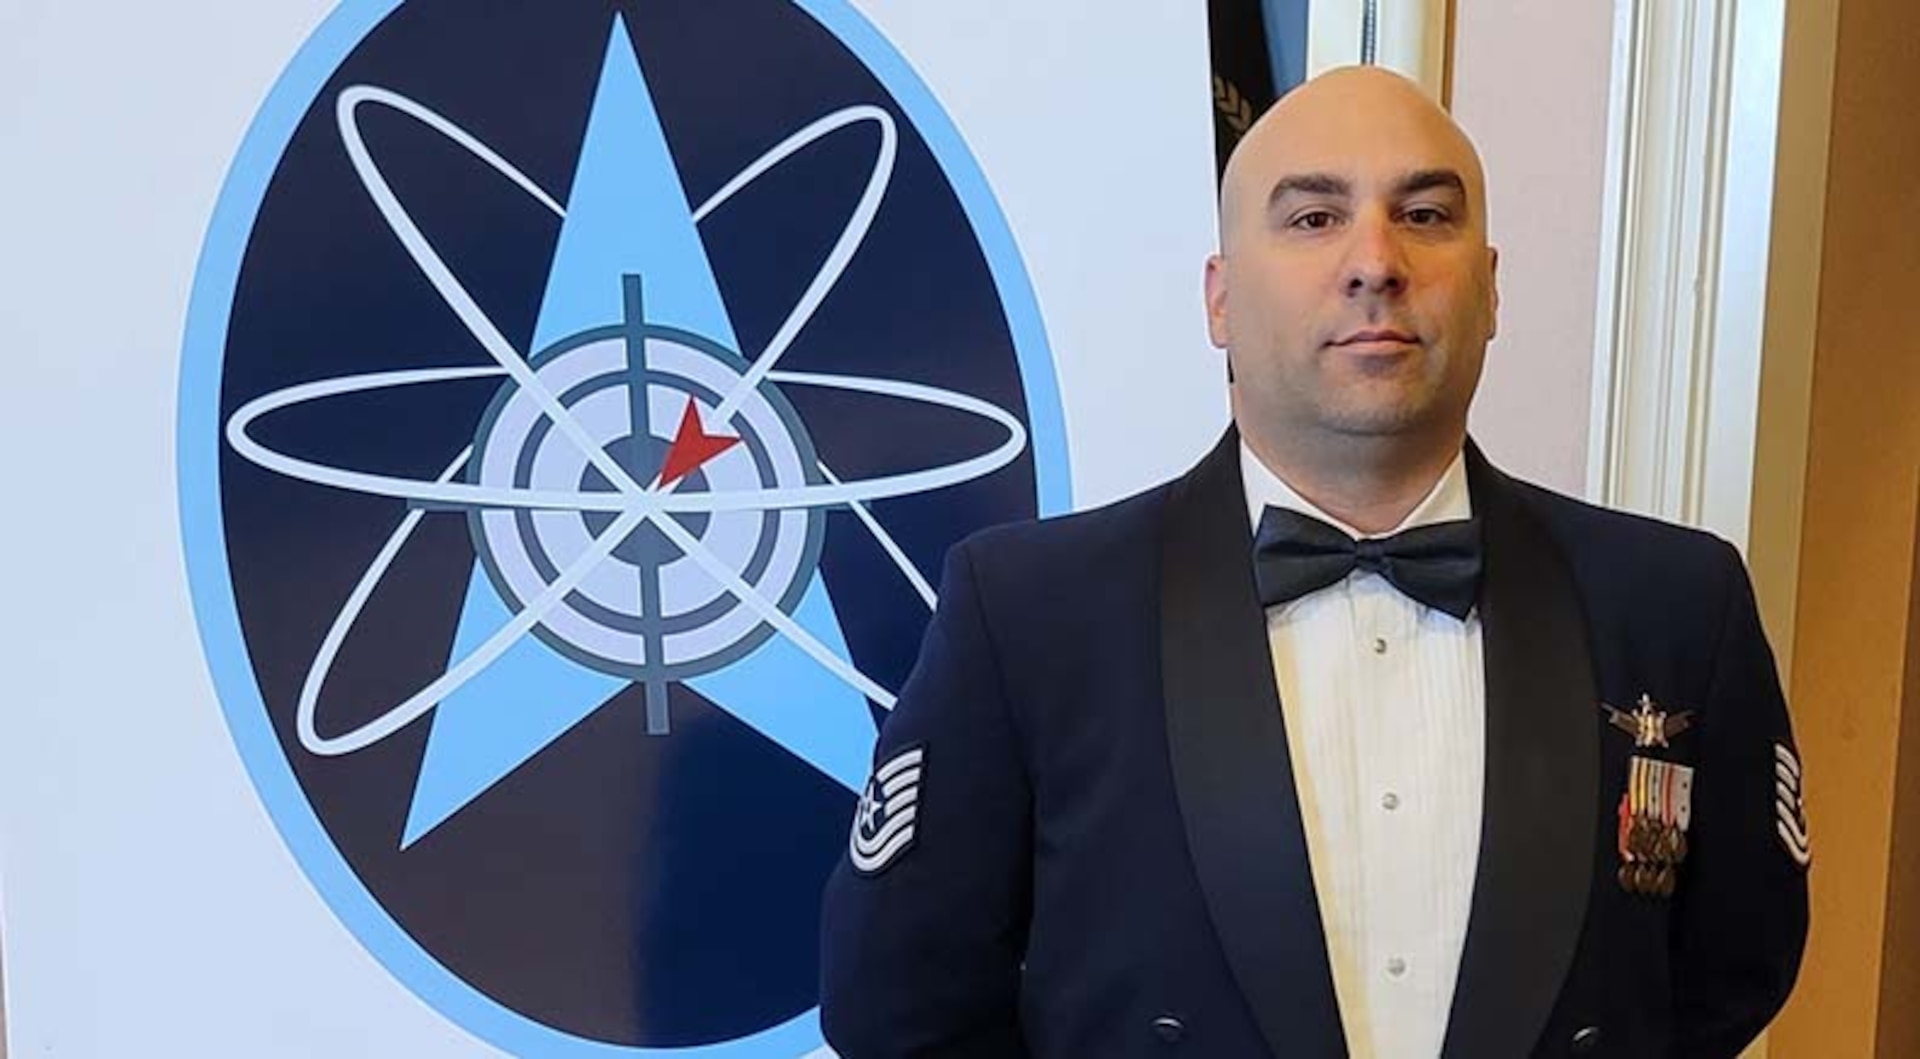 U.S. Air Force Tech Sgt. Ryan Colon, a 114th Space Control Squadron weapons instructor, in front of a graphic of the enlisted weapons patch following his graduation from the Space Warfighter Advanced Instructor Course at Nellis Air Force Base, Nevada, in June 2022.